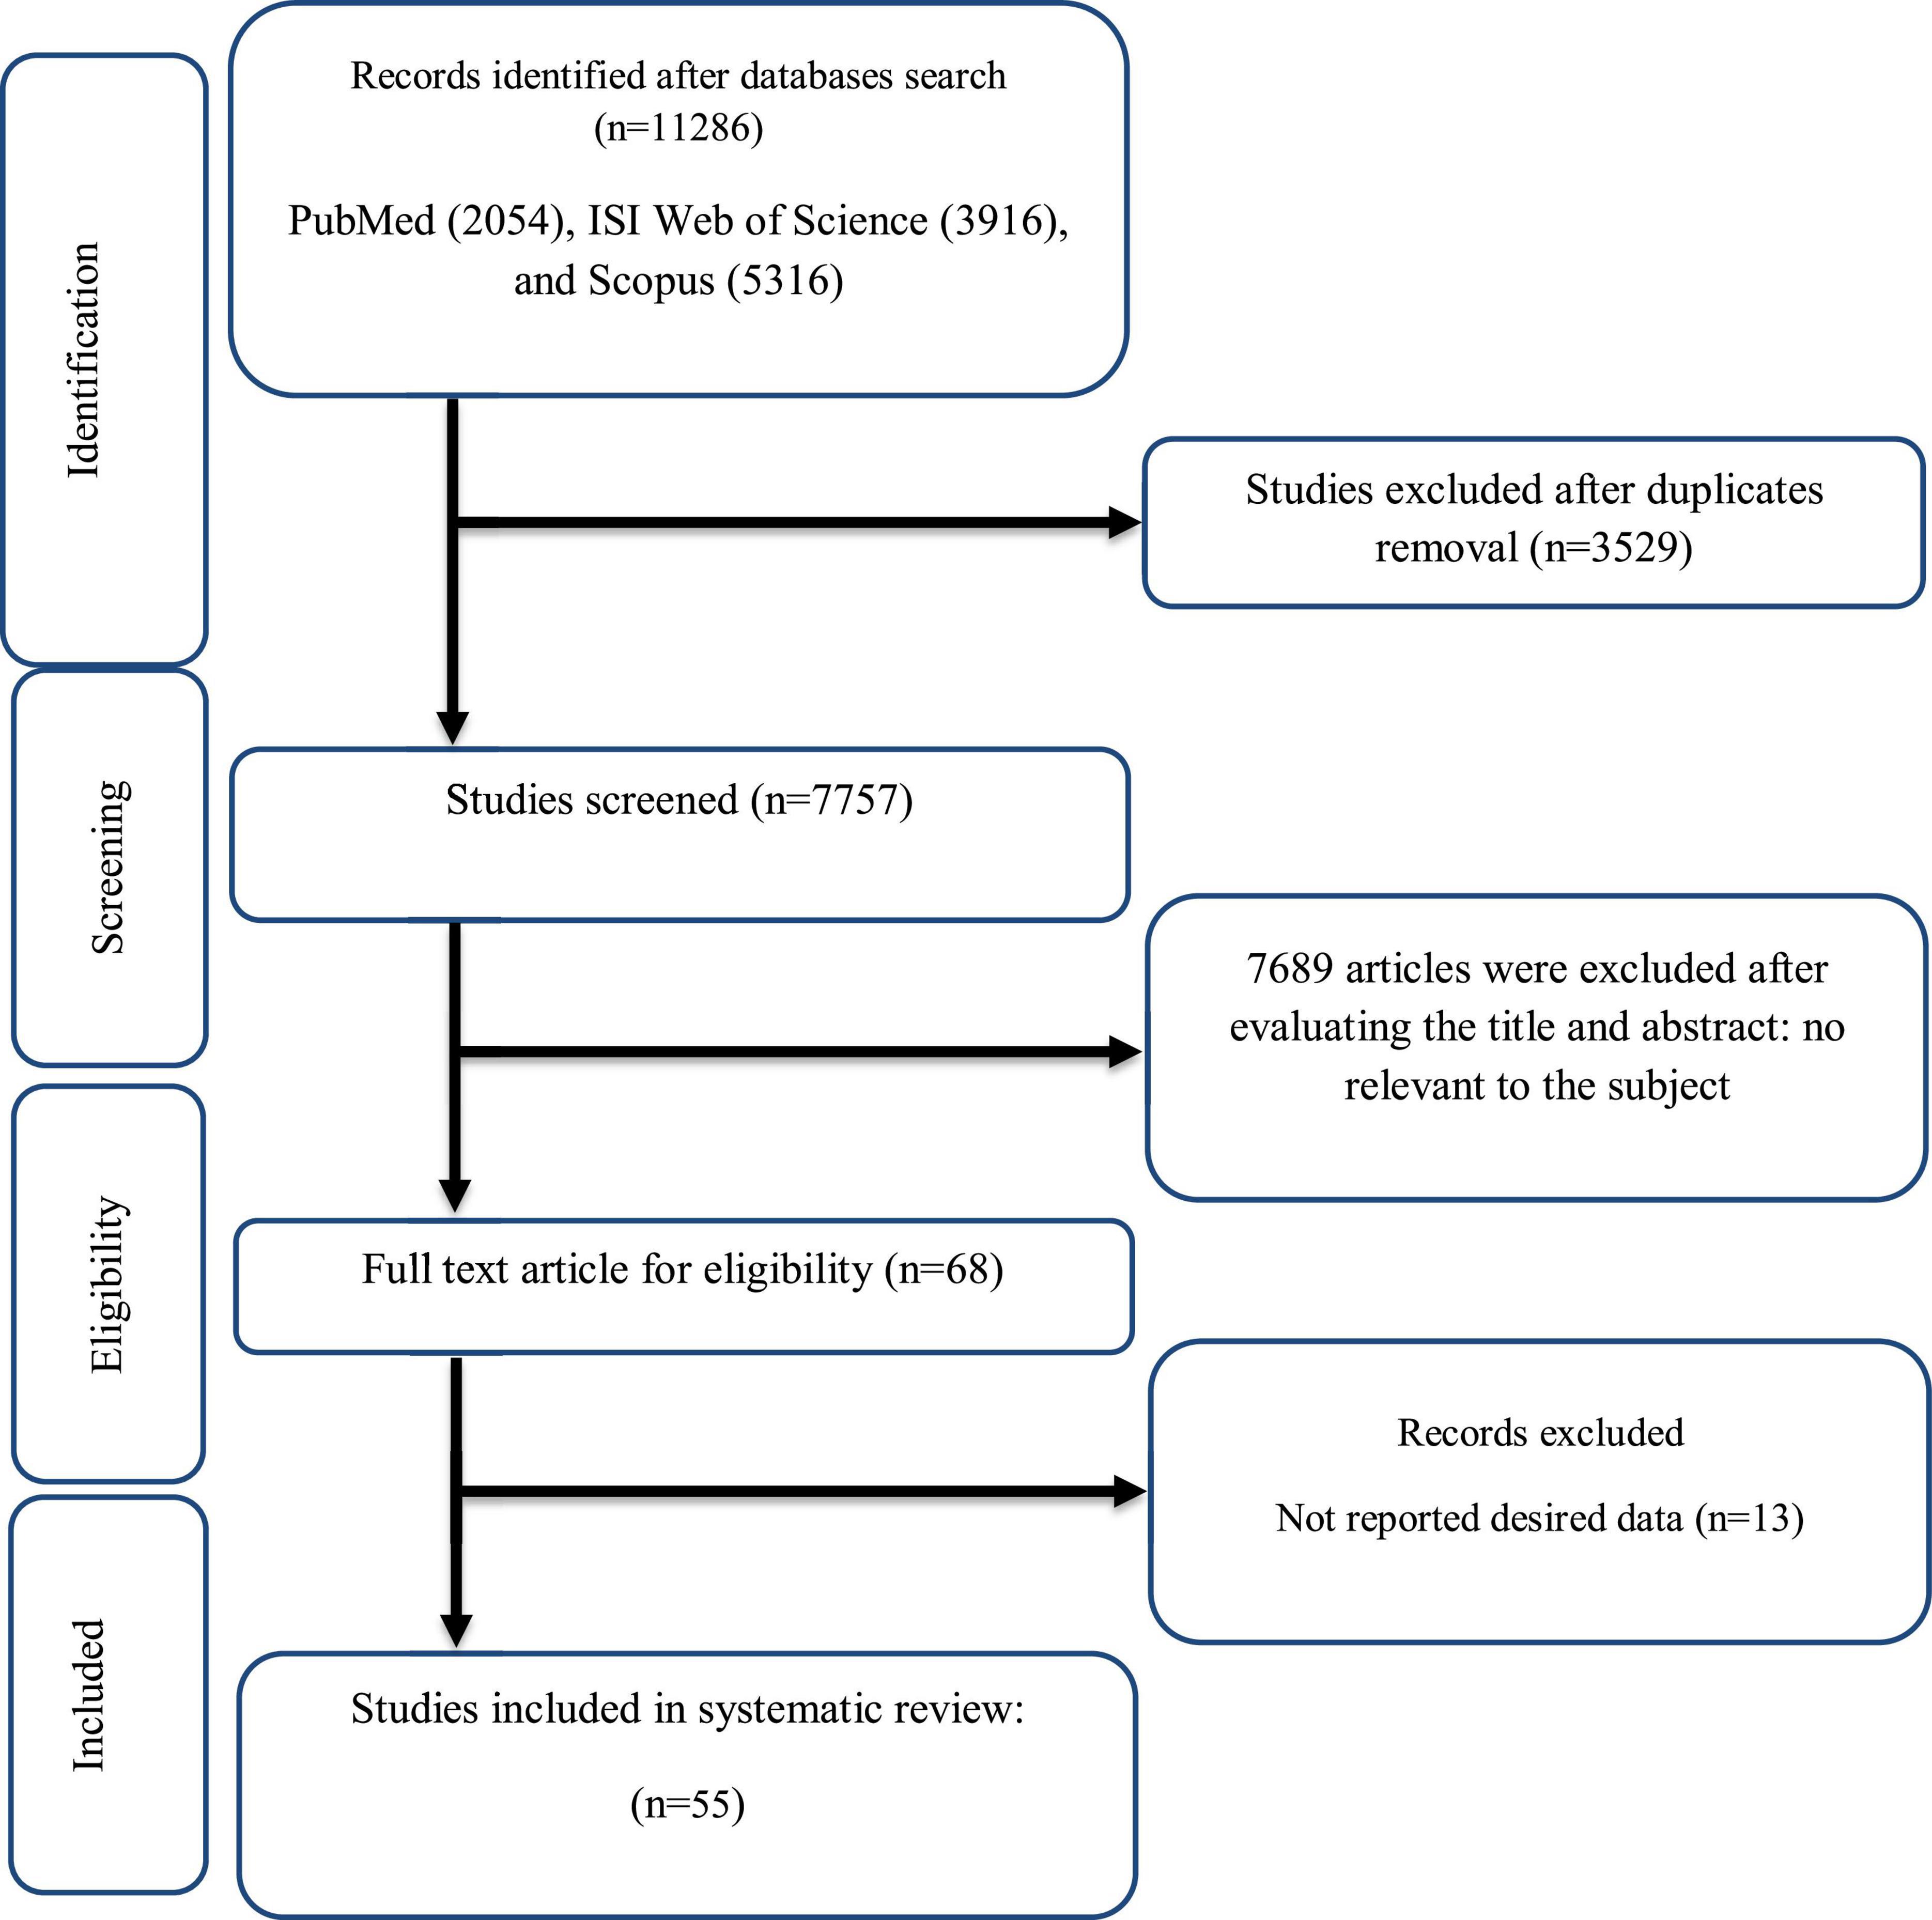 The effects of green tea supplementation on cardiovascular risk factors: A systematic review and meta-analysis